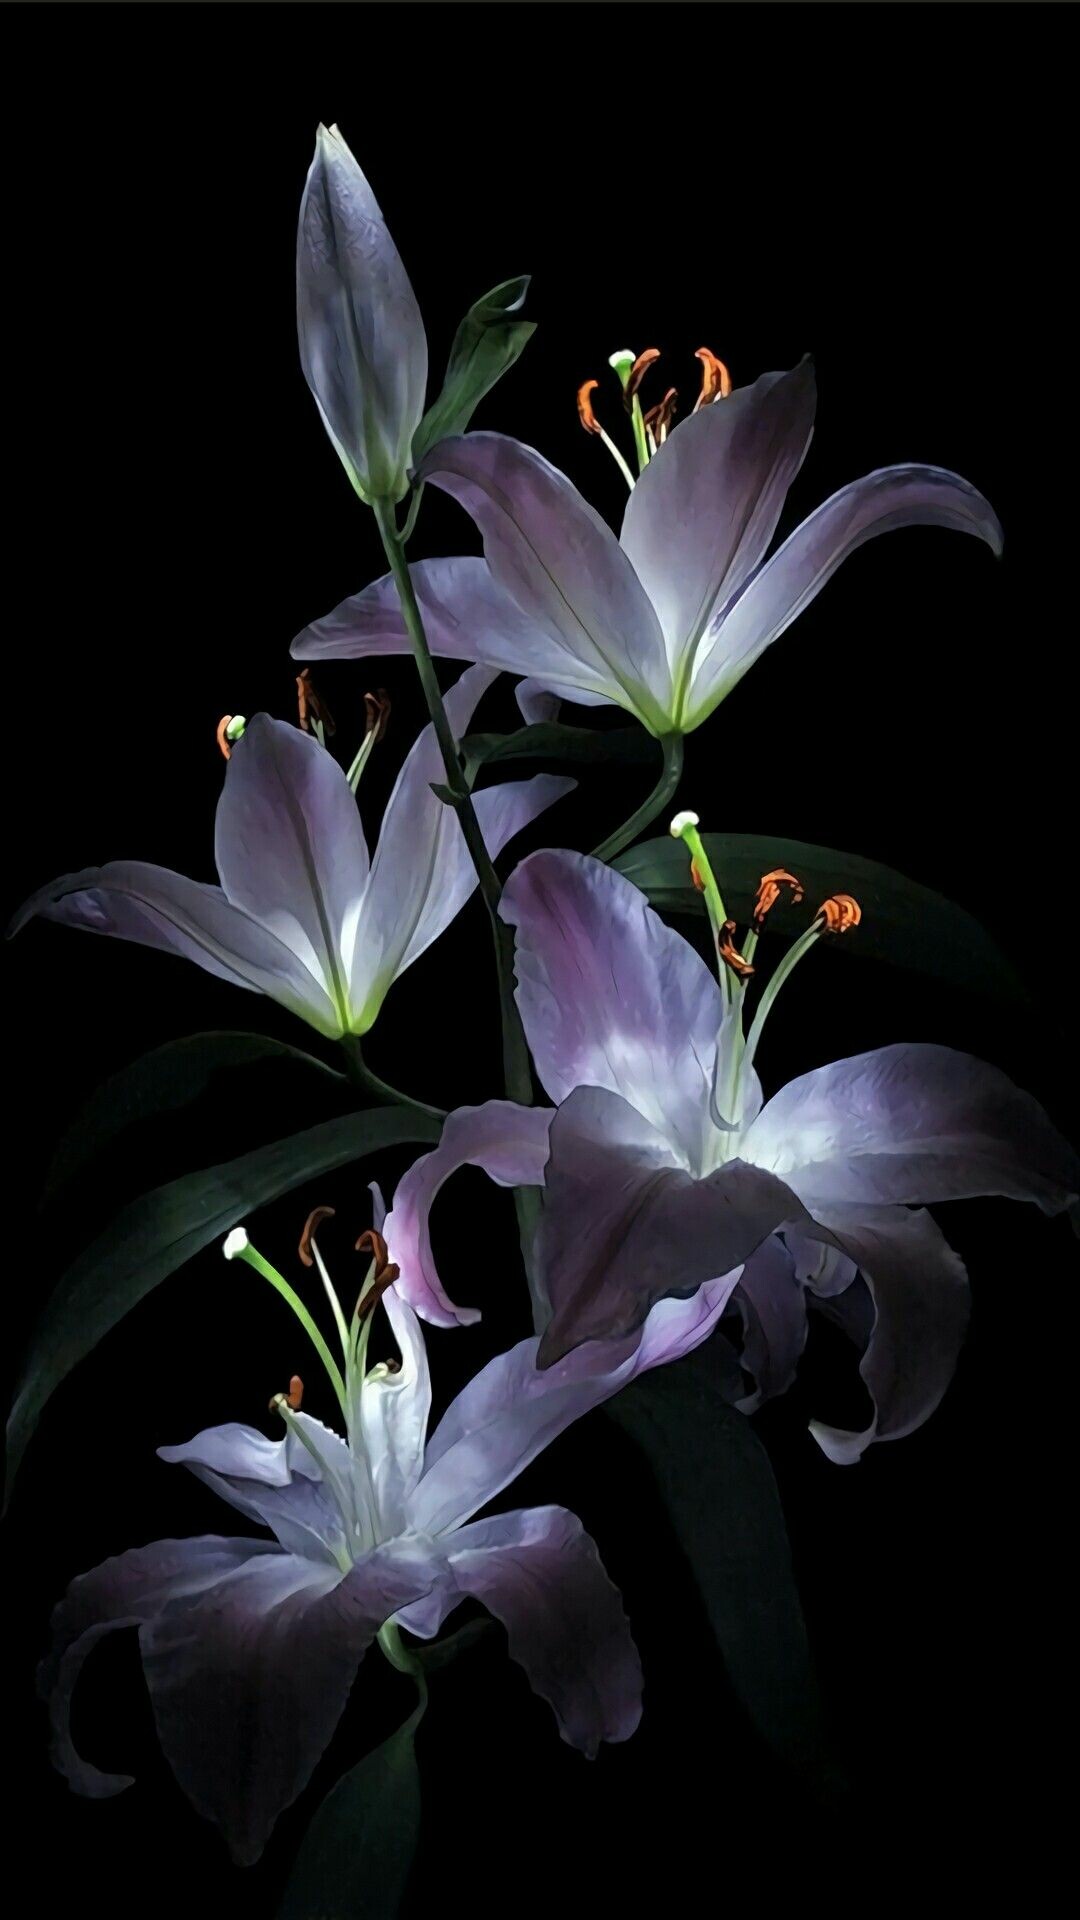 Flower phone wallpaper, Beautiful flowers, Lily wallpapers, Lovely background, 1080x1920 Full HD Phone